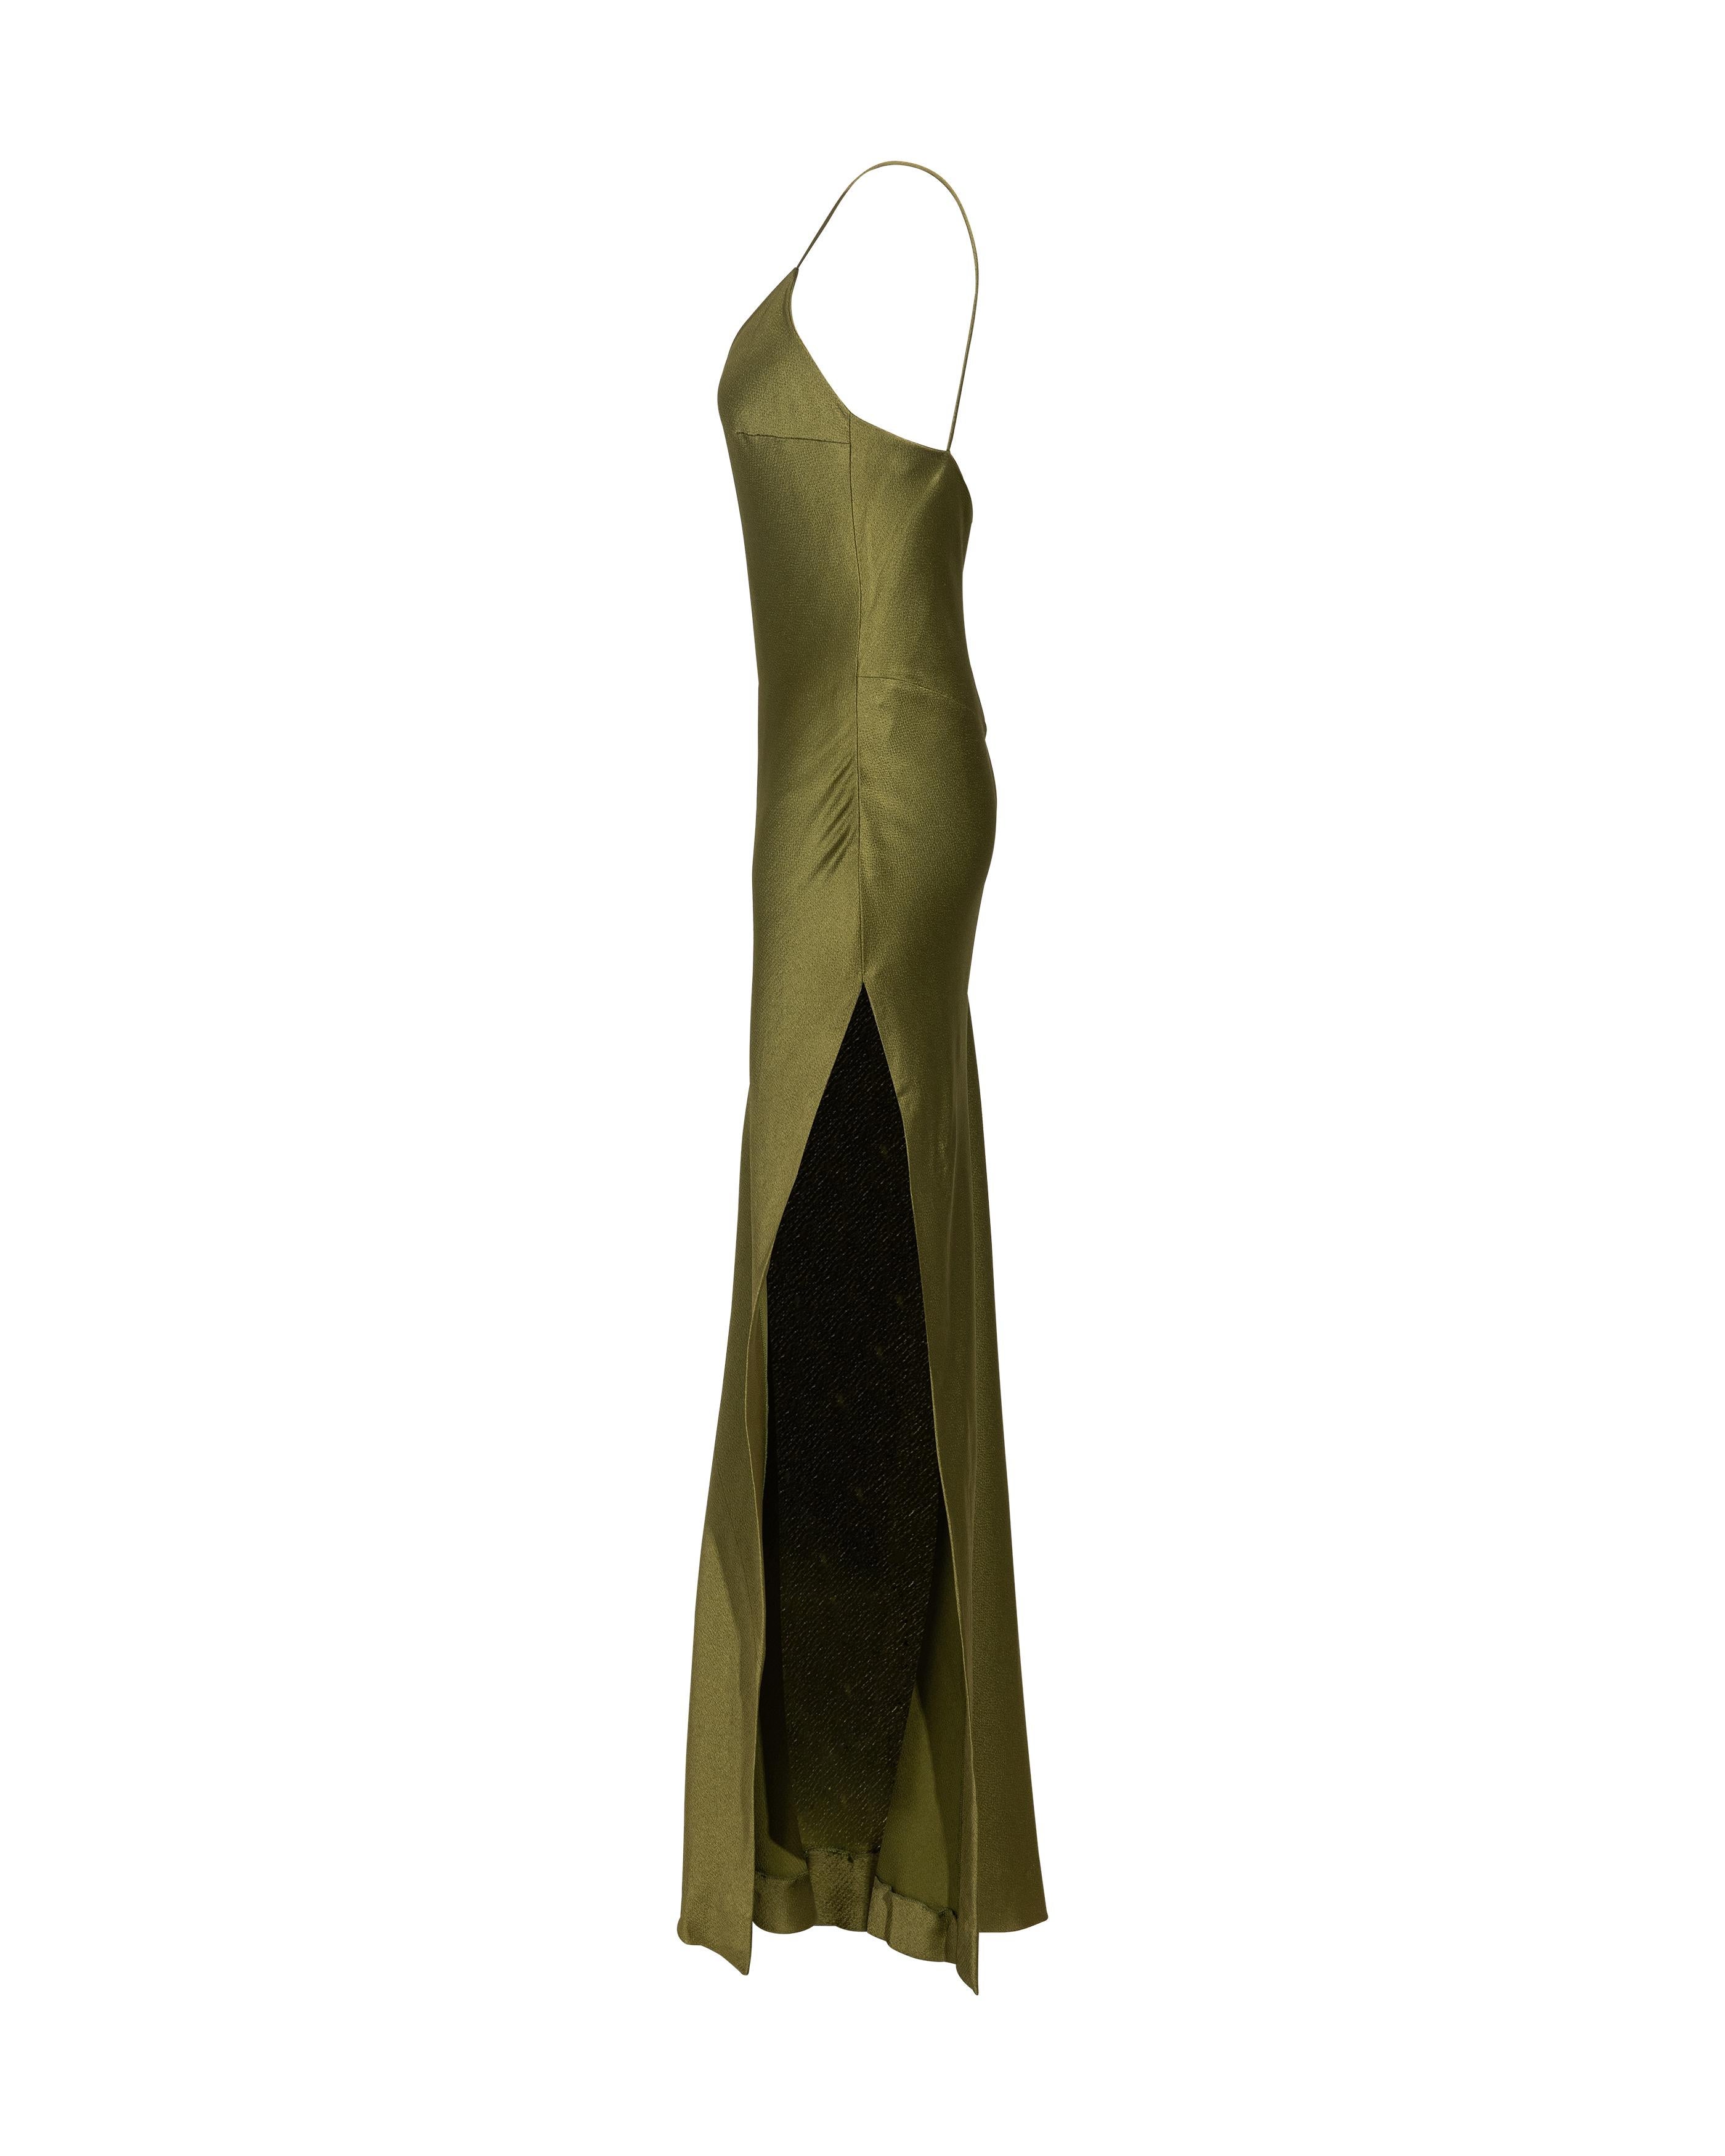 Women's S/S 1999 Christian Dior by John Galliano Olive Green Bias Cut Slip Gown For Sale